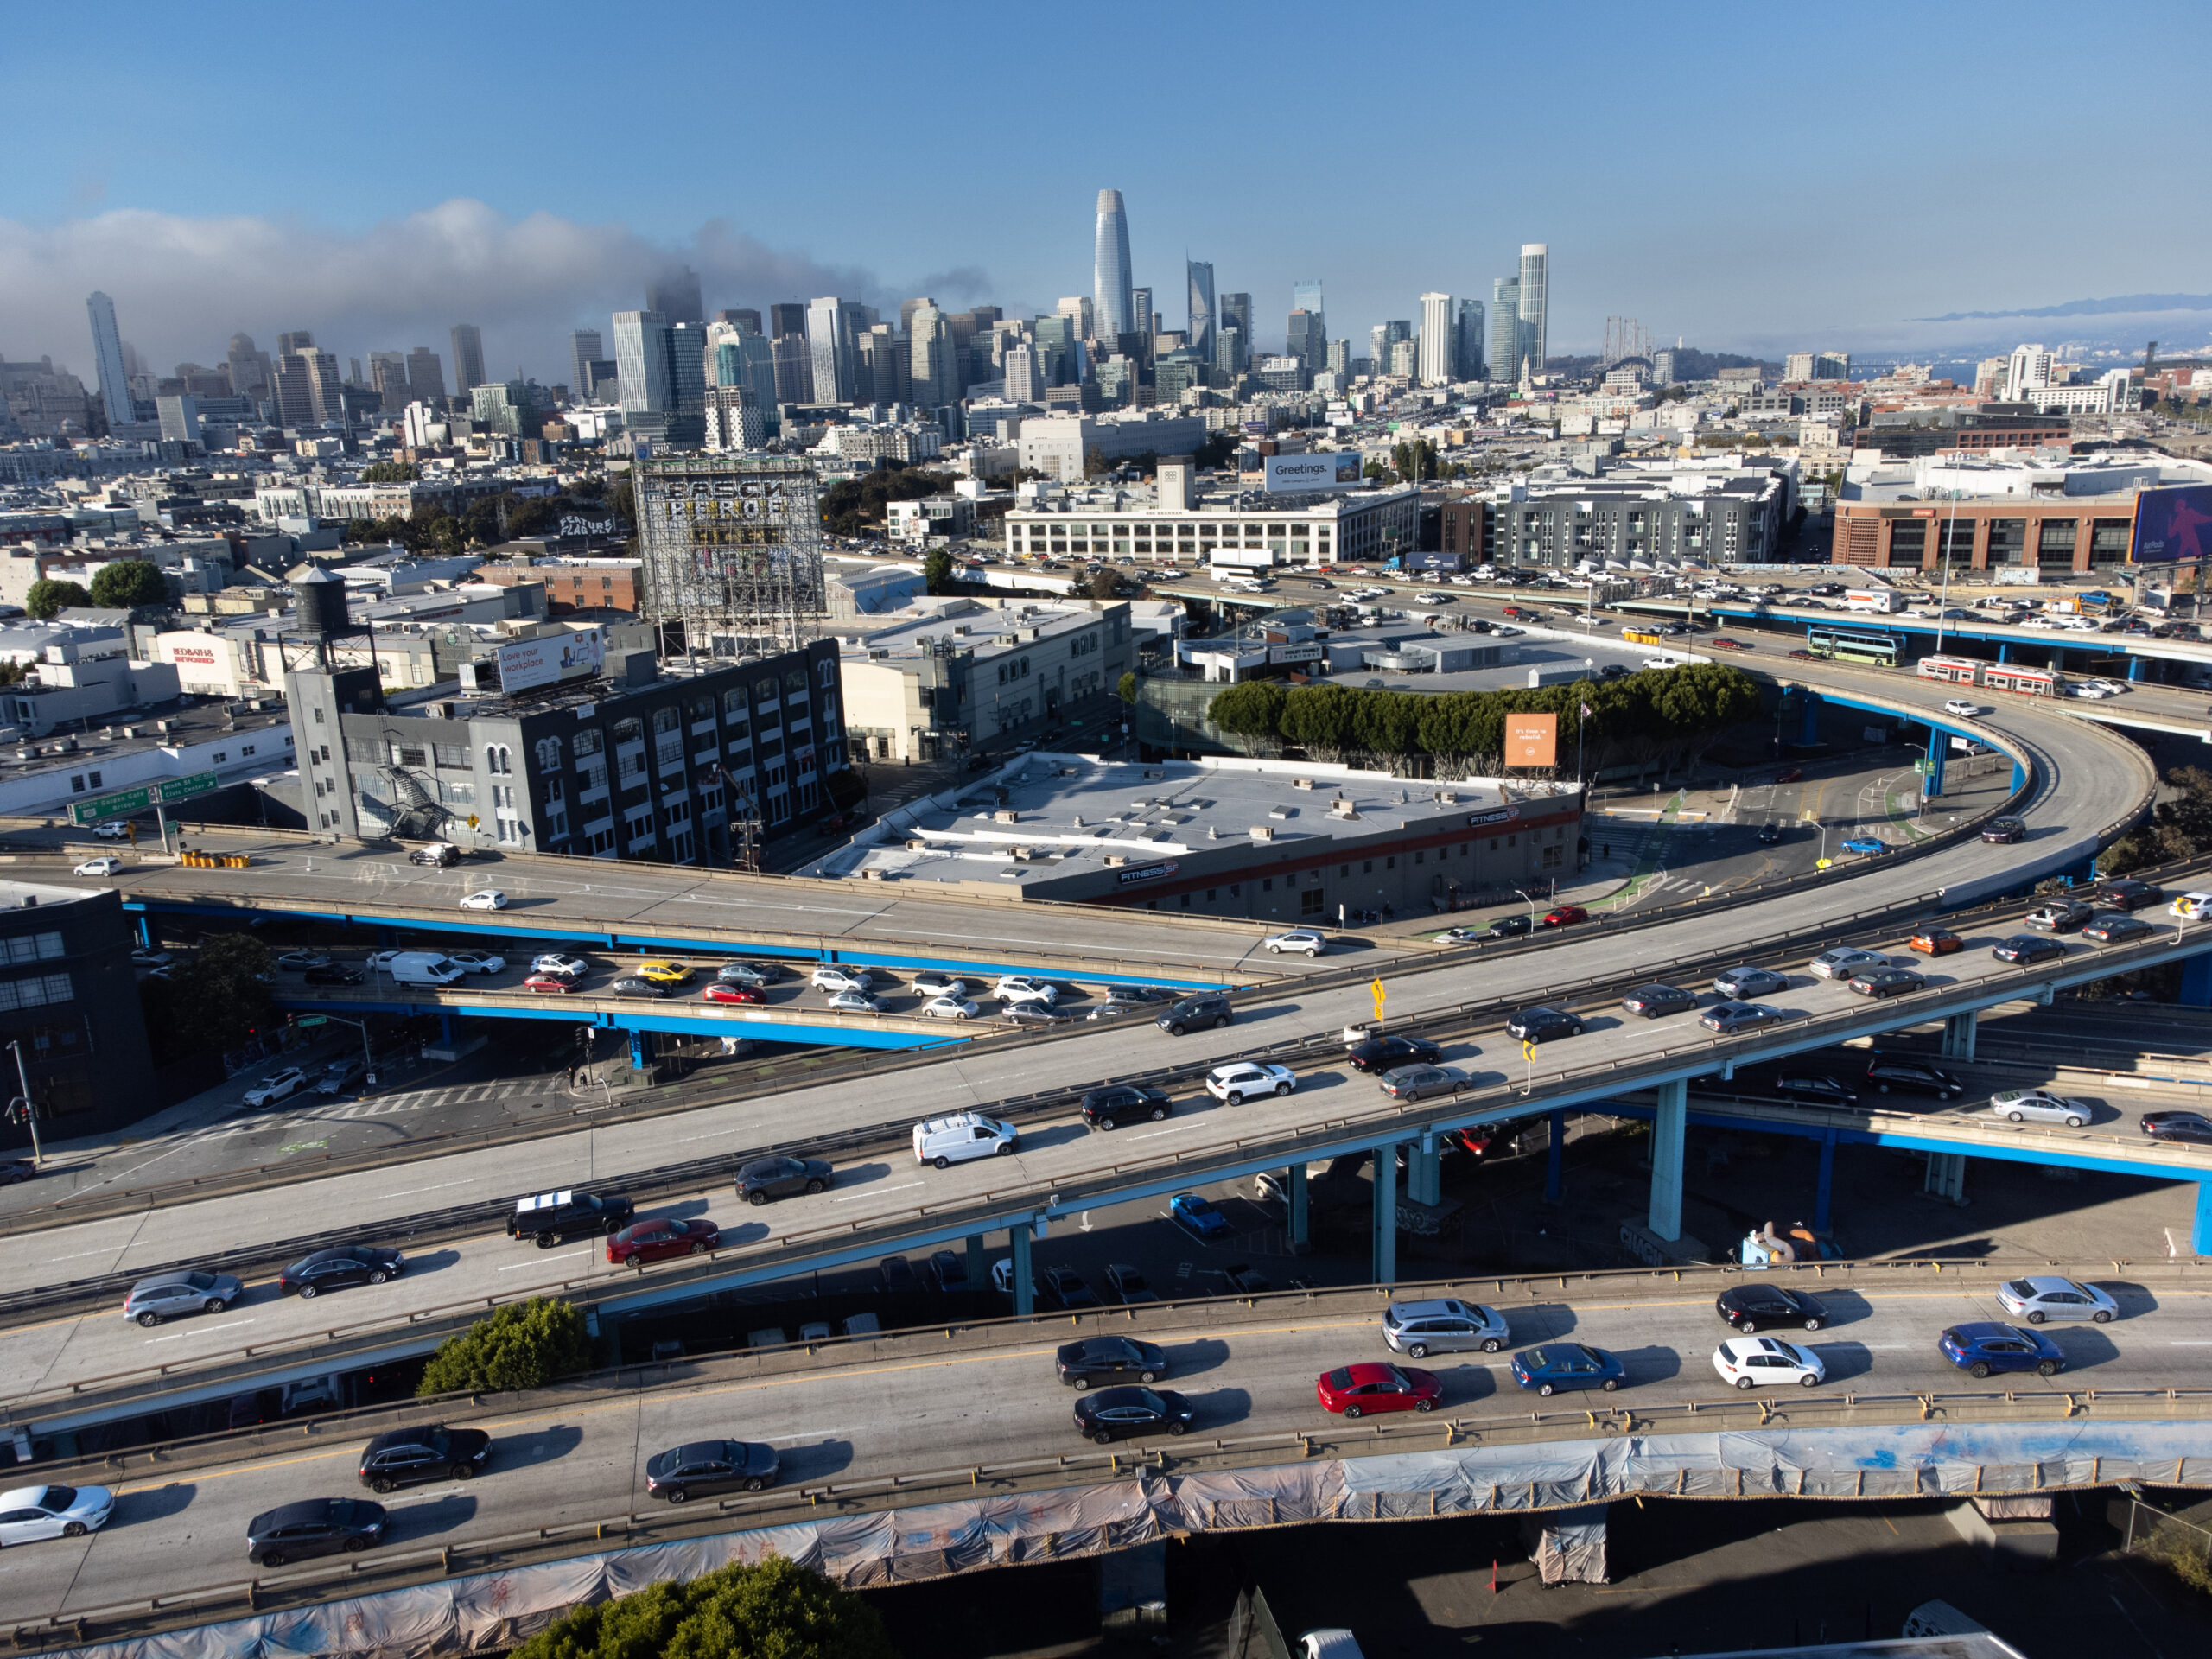 Forget the Central Subway—What’s Happening With the Central Freeway?